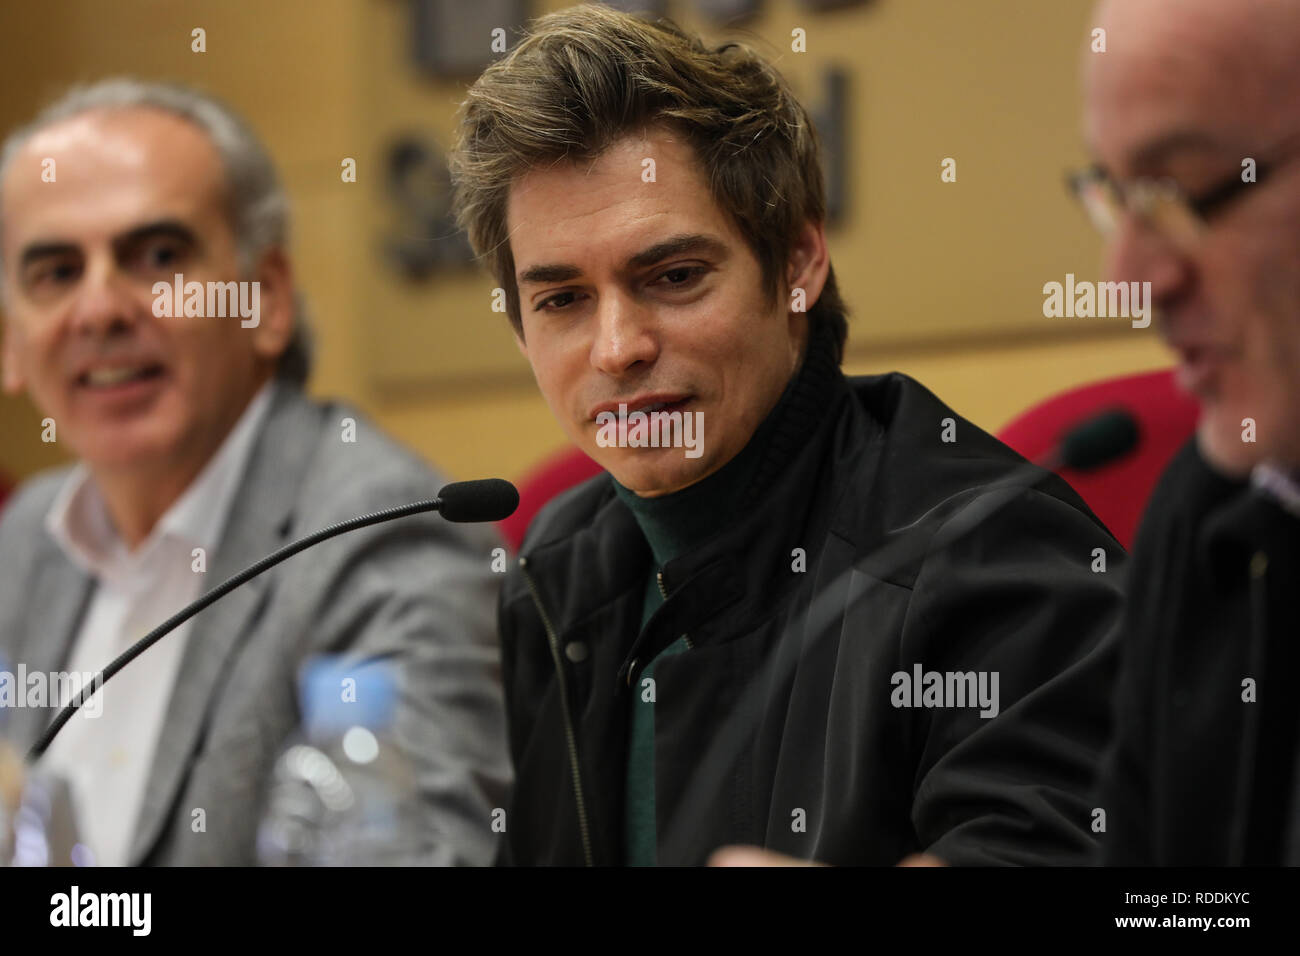 Madrid, Spain. 18th January, 2019. Carlos Baute, Venezuelan singer and president of the NGO 'A medicine for Venezuela' speaking about the situation in Venezuela. The Councilor for Health of the Community of Madrid, Enrique Ruiz Escudero, accompanied by the ambassador of the NGO 'A medicine for Venezuela', the Venezuelan singer Carlos Baute, and the director of the Association, Vanessa Pineda, assist in the donation of sanitary material performed by the University Hospital of the Sureste to the aforementioned organization. Credit: Jesús Hellin/Alamy Live News Stock Photo